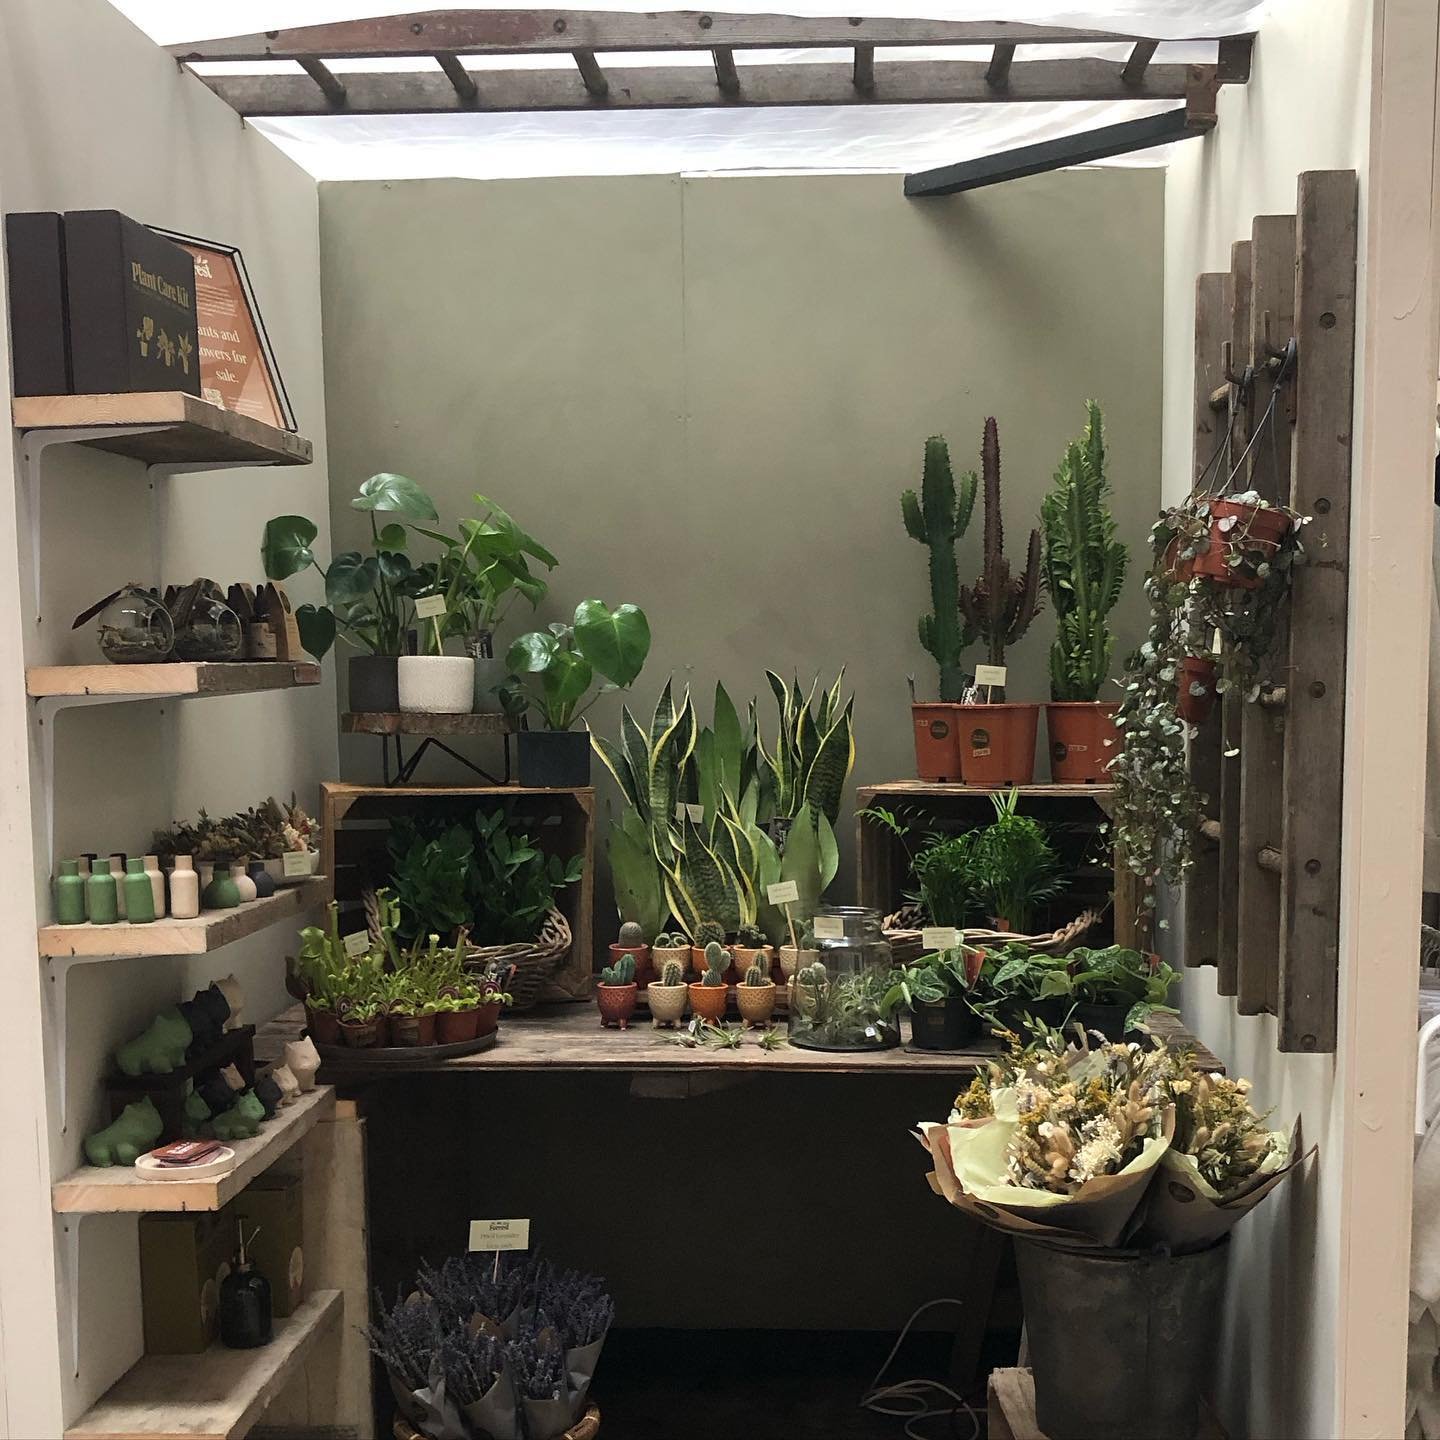 Our mini shop is all set up @redbrickmarket_sheffield which opens on Monday 18th we have a lovely section of indoor plants, plant accessories and dried flowers. come on down and take a look at all the lovely creatives in this huge space. 🪴 

#shefie